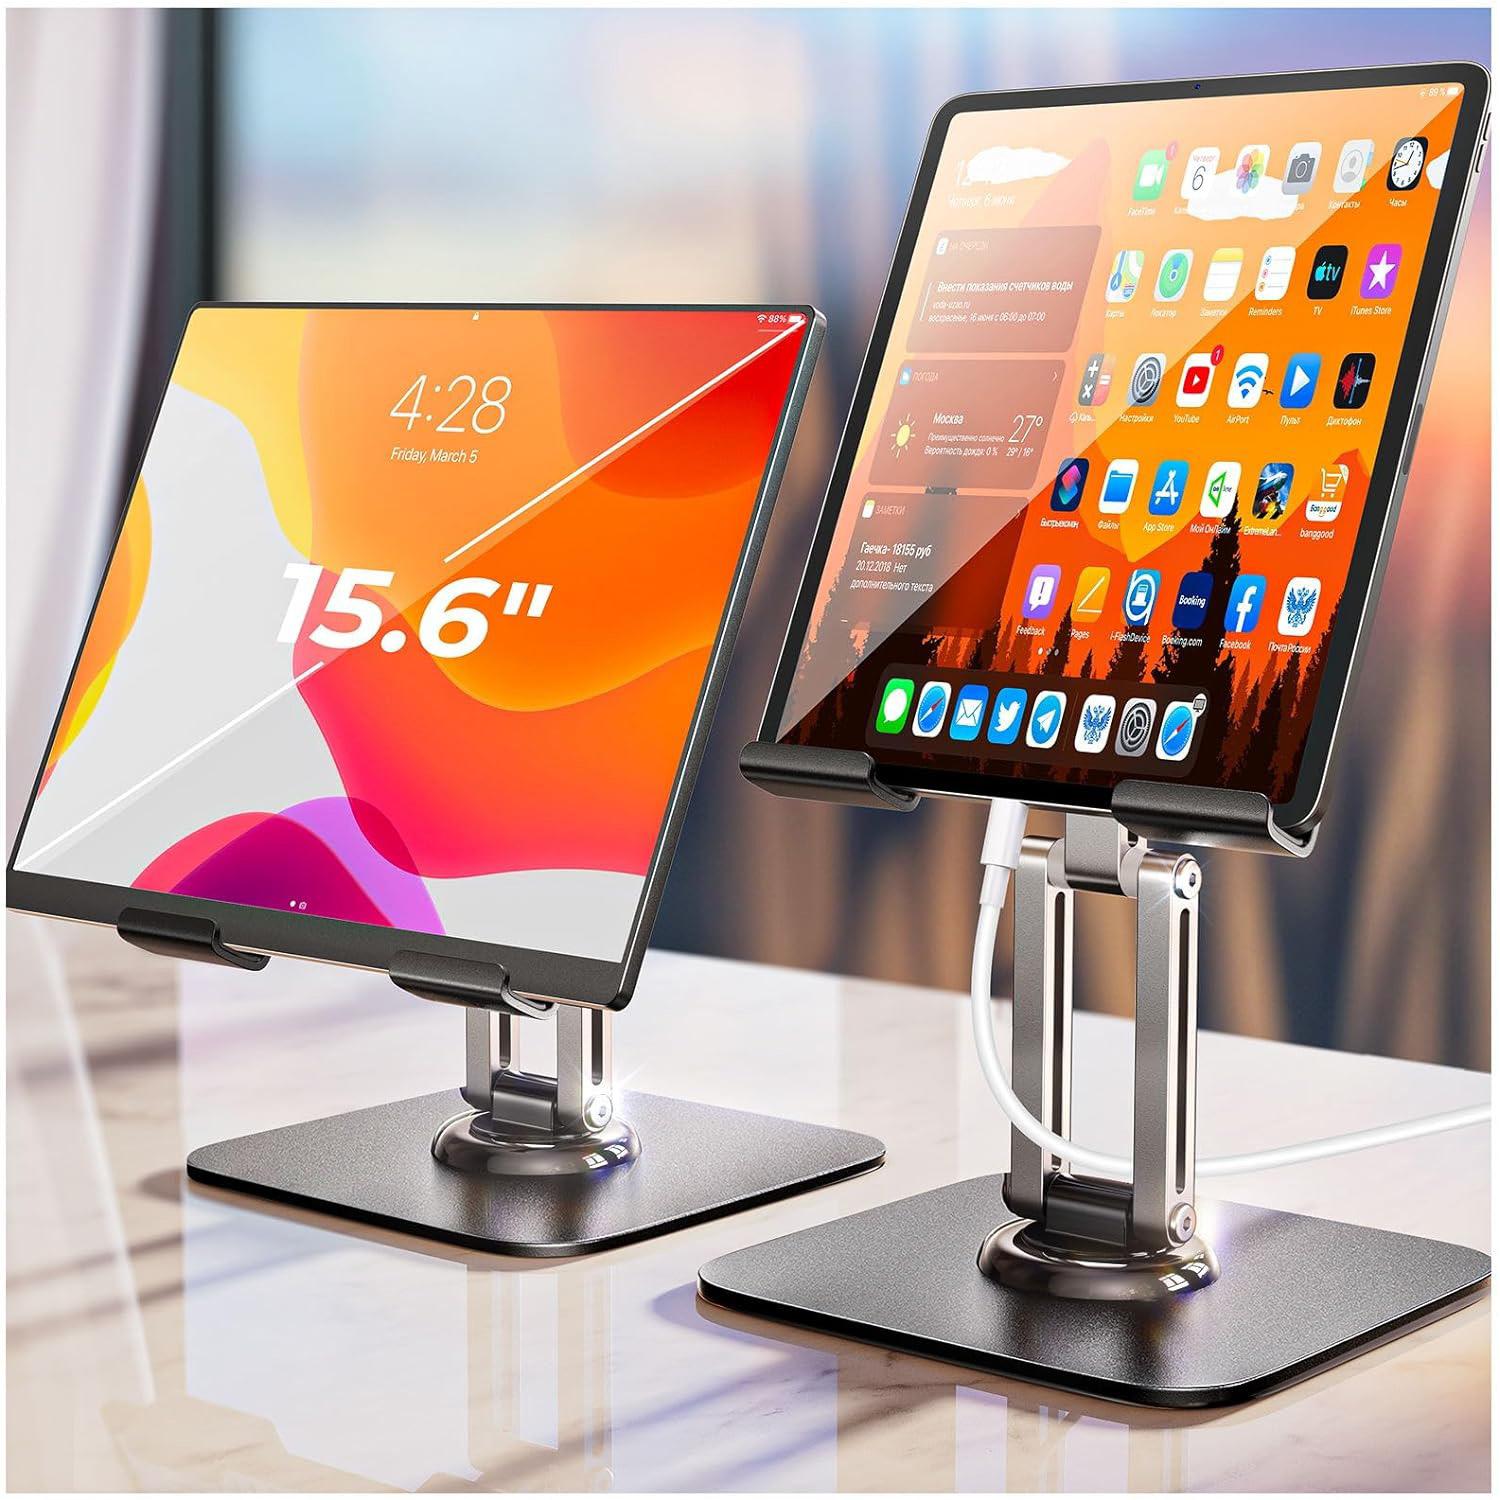 Lisen iPad Adjustable Tablet Stand for $7.99